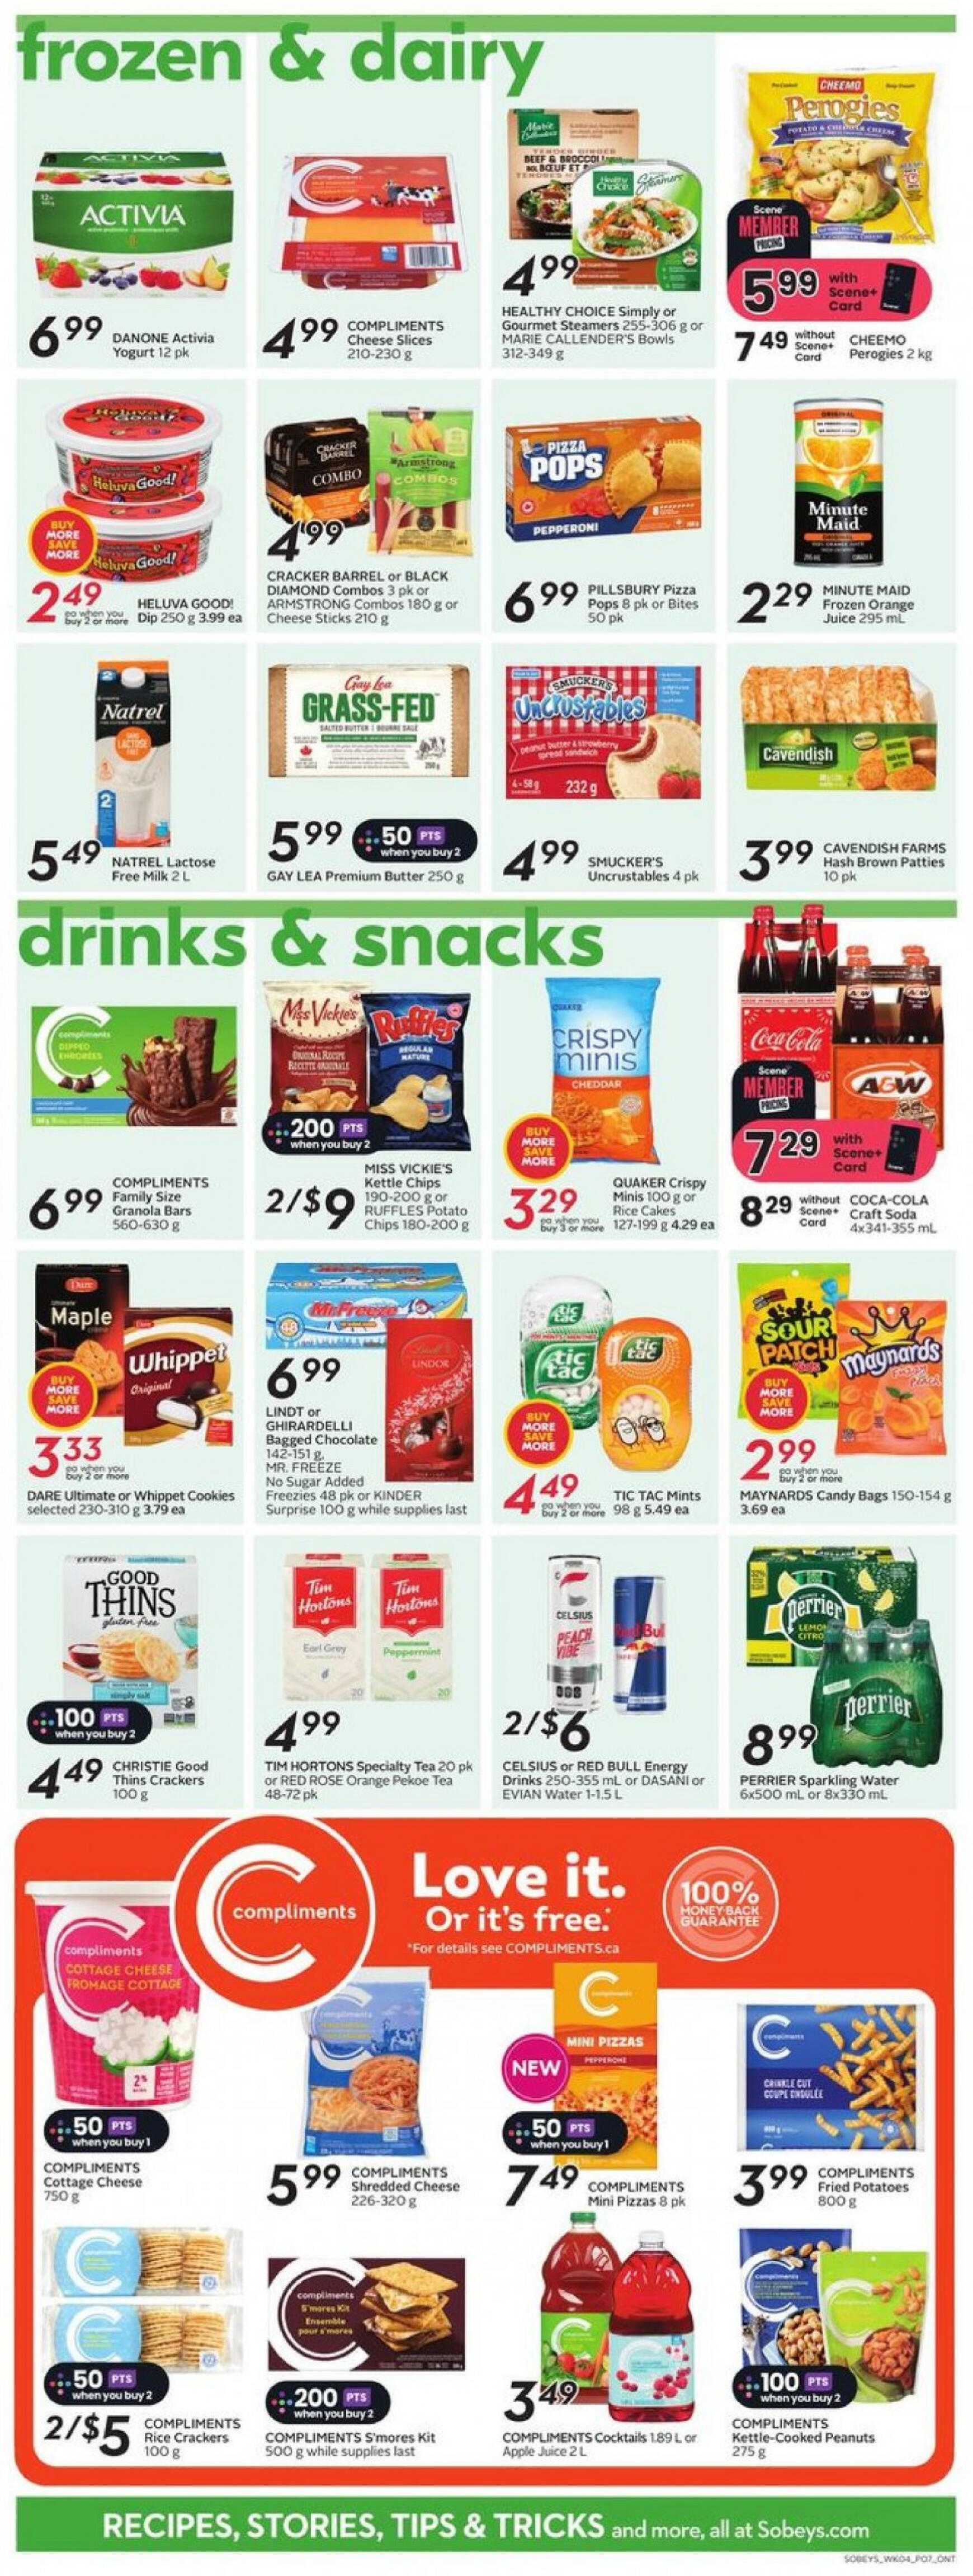 sobeys - Sobeys - Weekly Flyer - Ontario flyer current 23.05. - 29.05. - page: 14